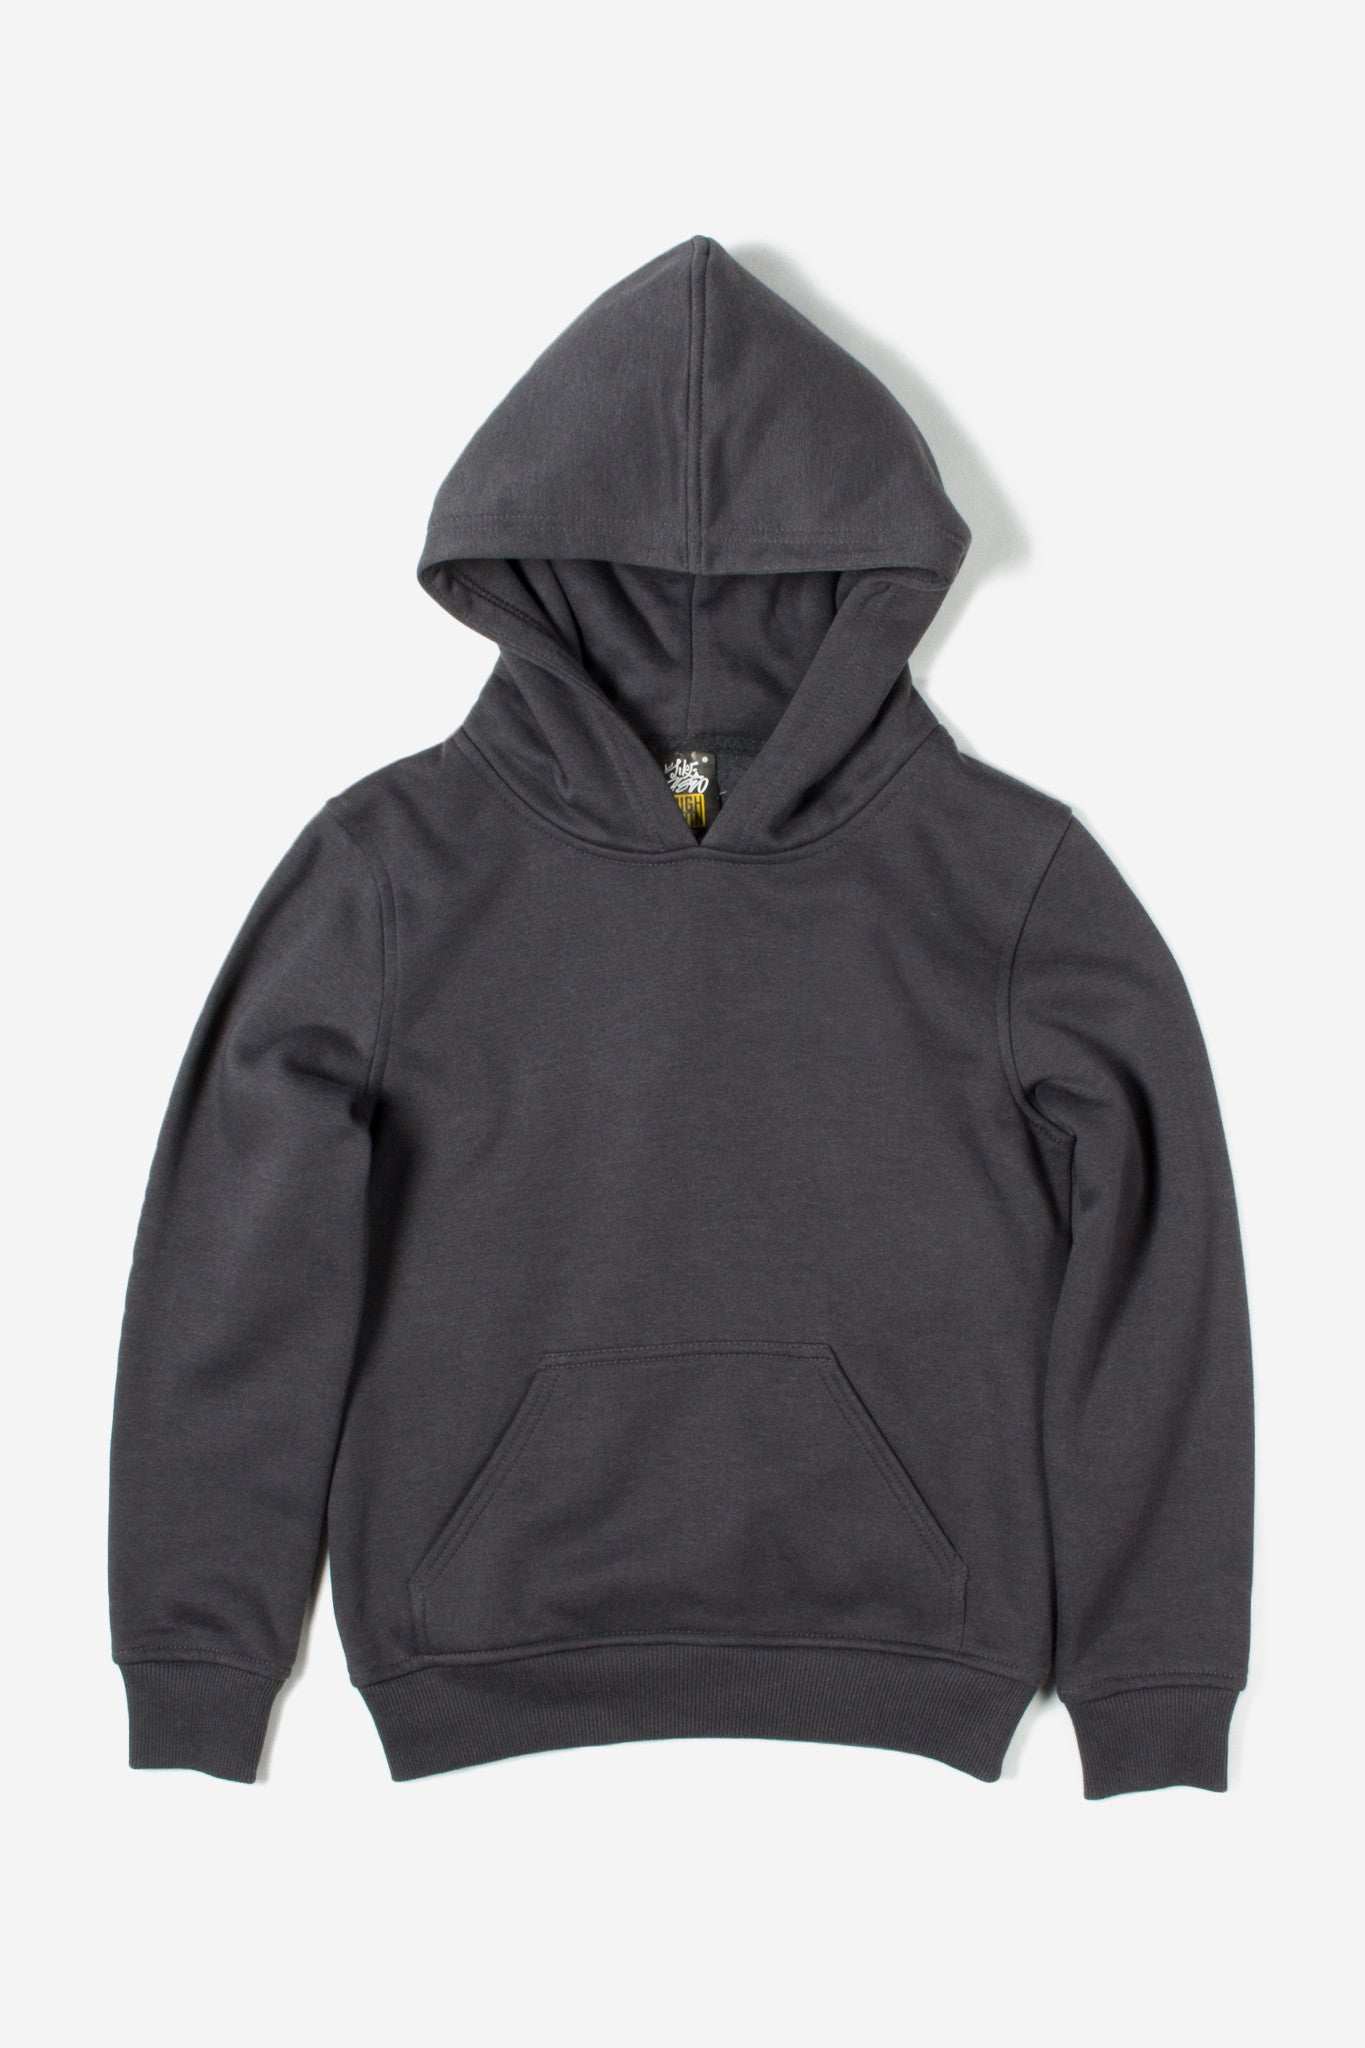 HERO - 2020 Youth Hoodie - Charcoal Grey (Discontinued)